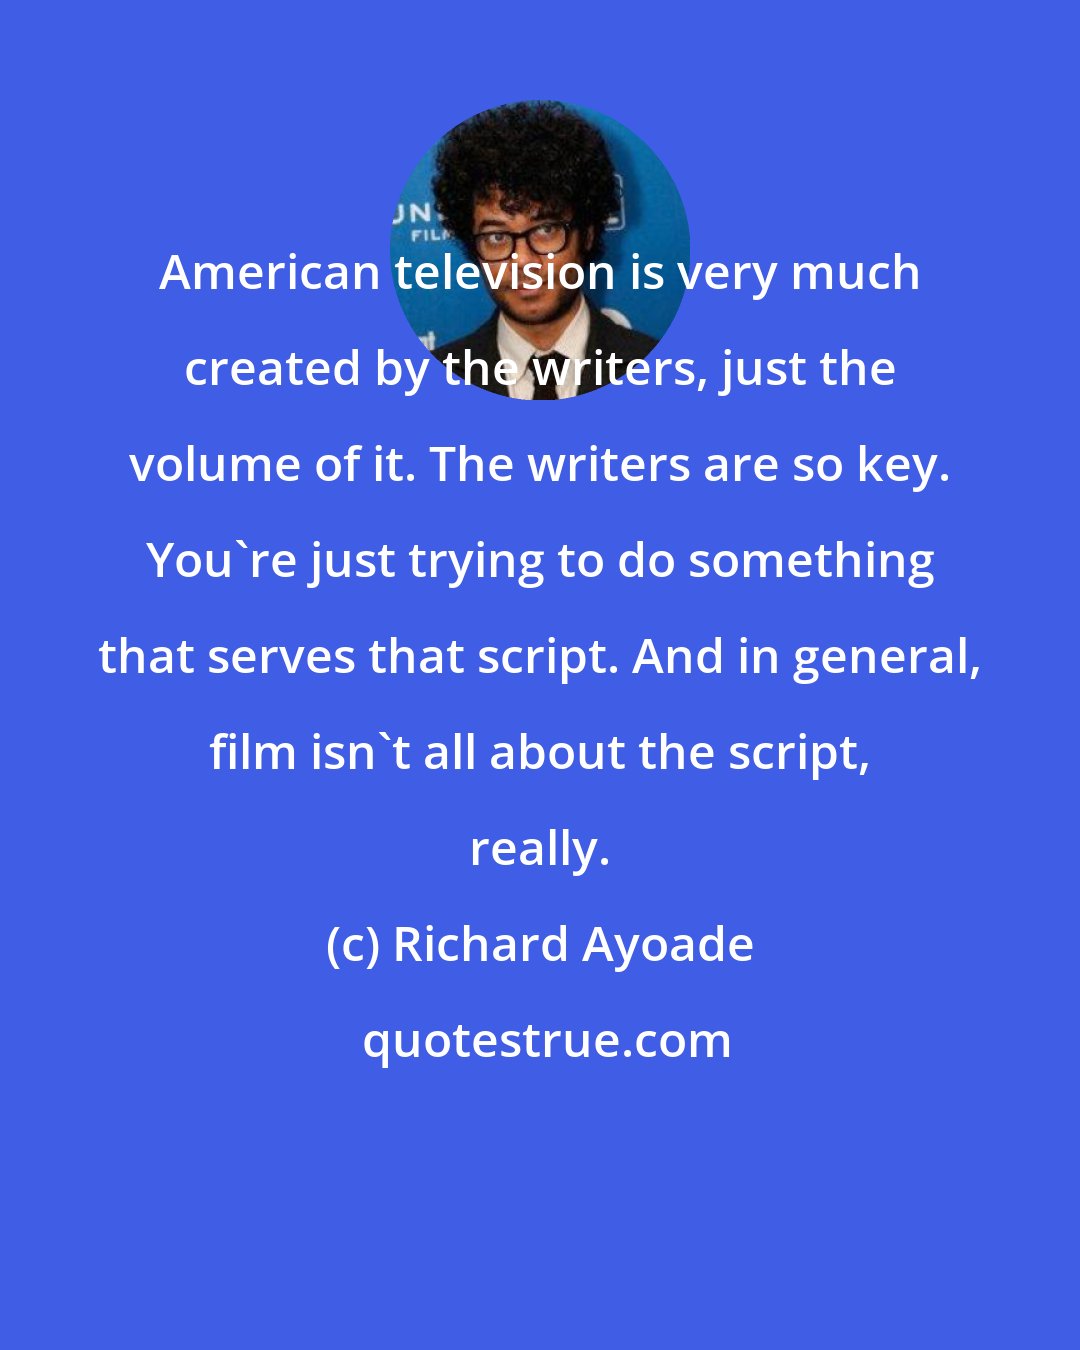 Richard Ayoade: American television is very much created by the writers, just the volume of it. The writers are so key. You're just trying to do something that serves that script. And in general, film isn't all about the script, really.